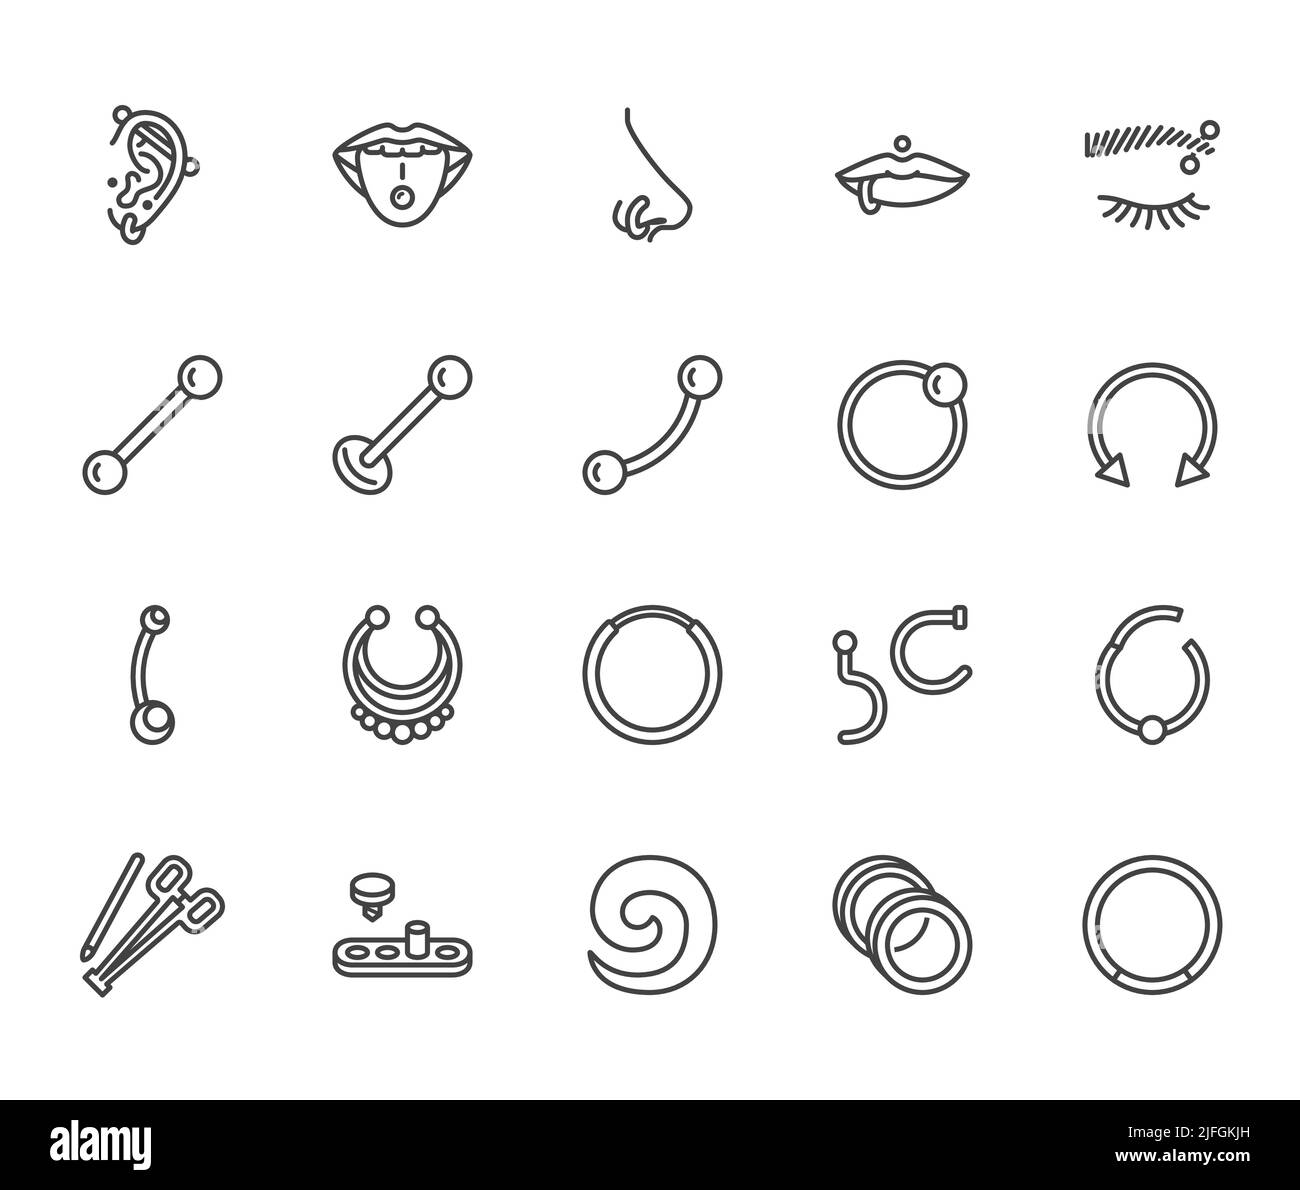 Piercing flat line icons set. Body jewelry, nose hoop, ear ring, tongue labret, tunnels, microdermal vector illustrations. Outline signs for piercings Stock Vector